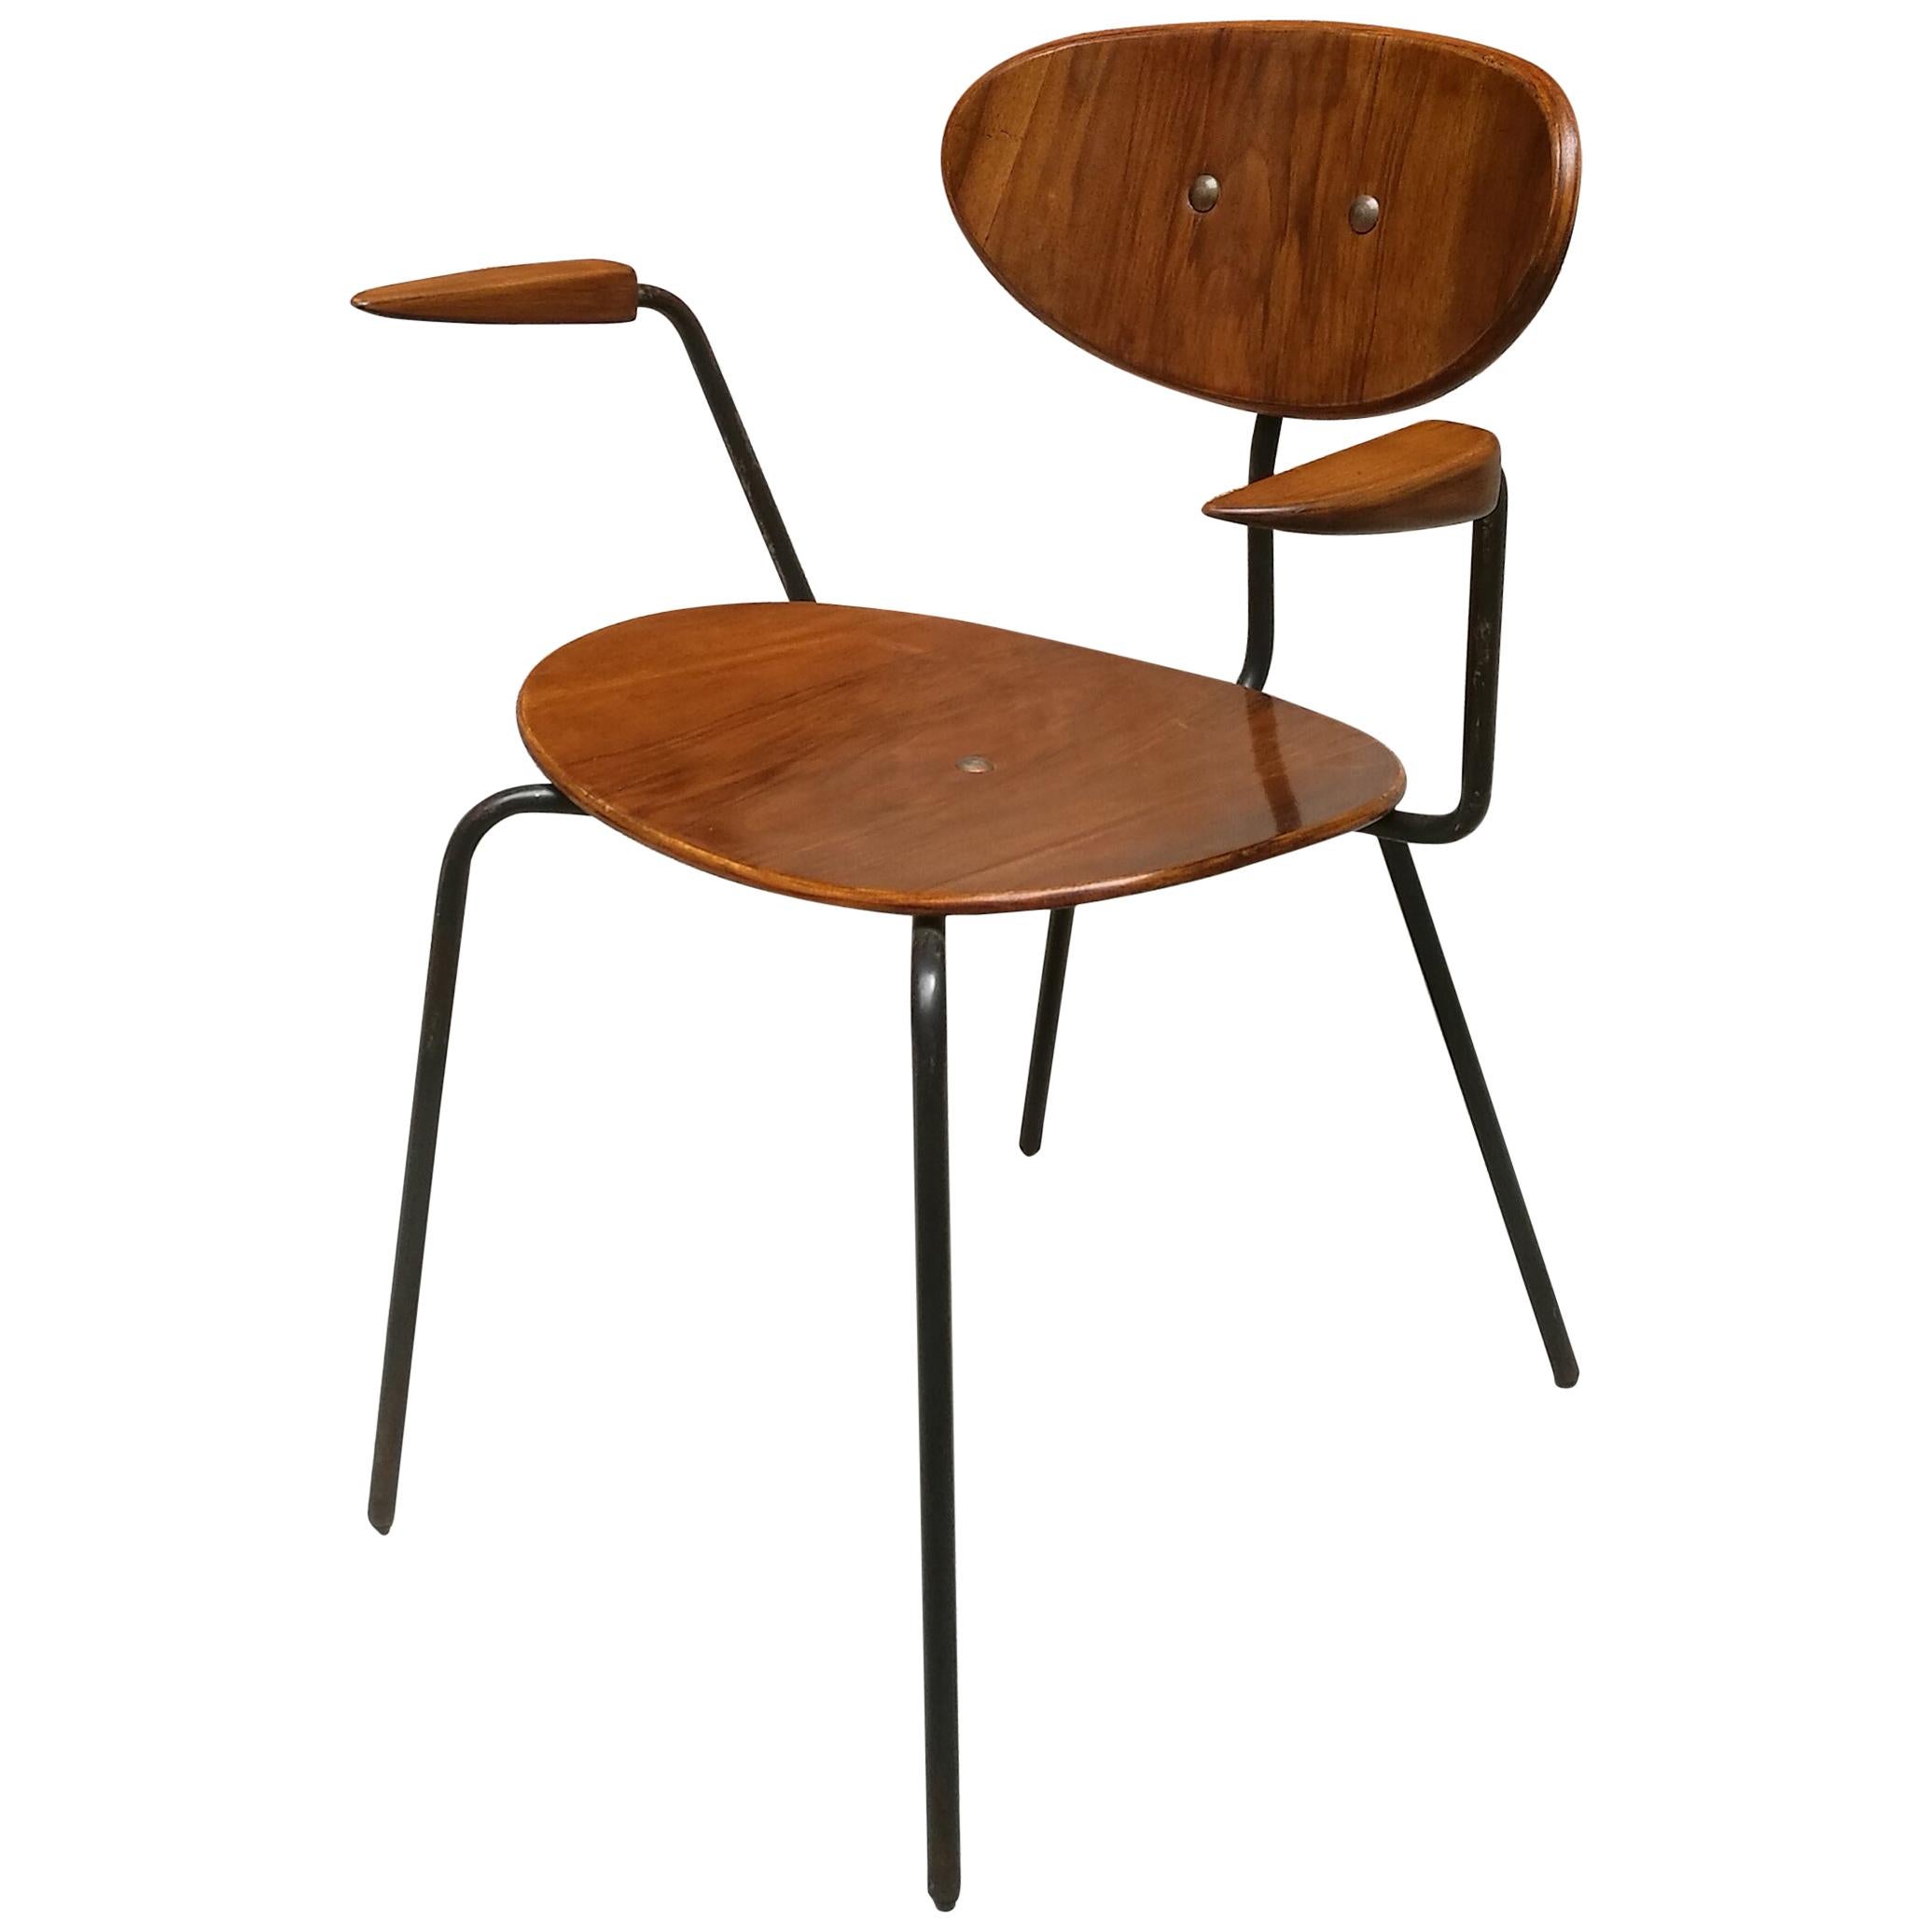 Teak Chair with Armrests from Germany, 1960s